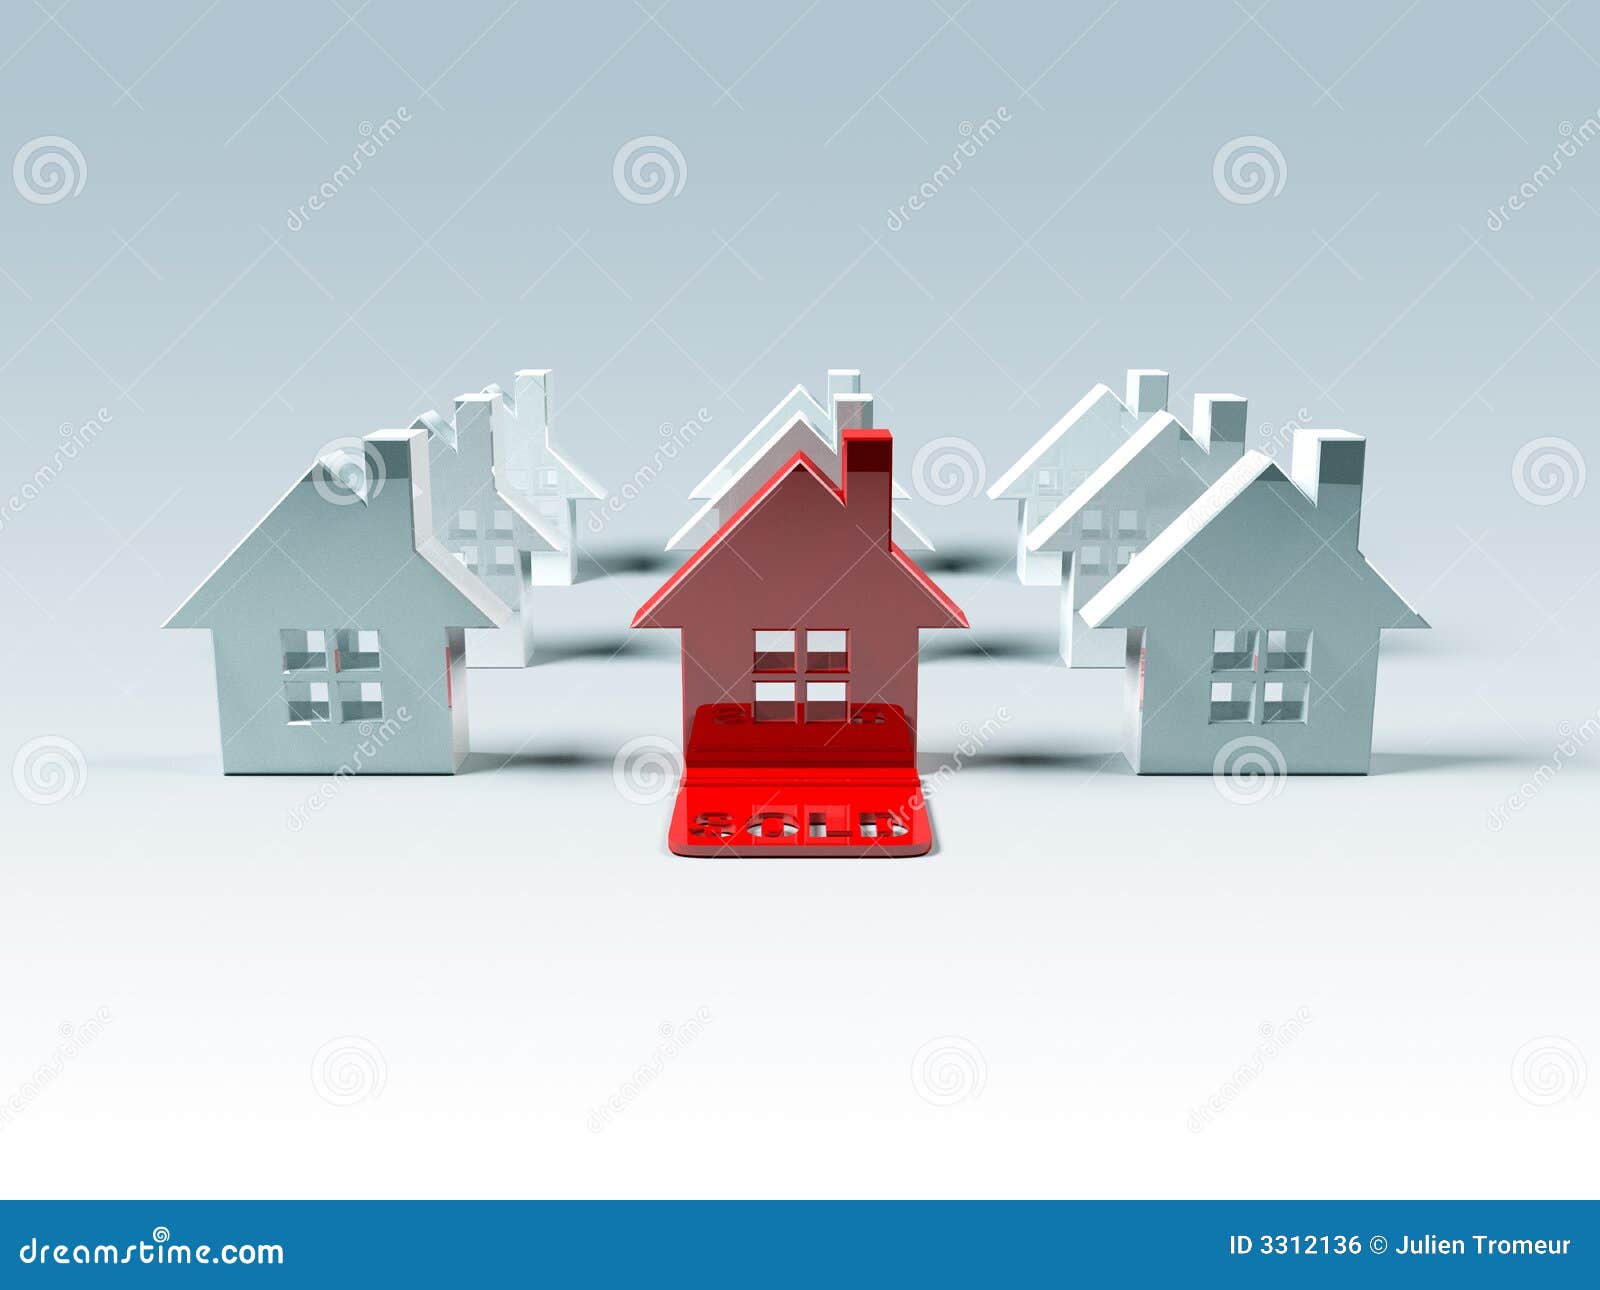 Real Estate : Sold Royalty Free Stock Image  Image: 3312136